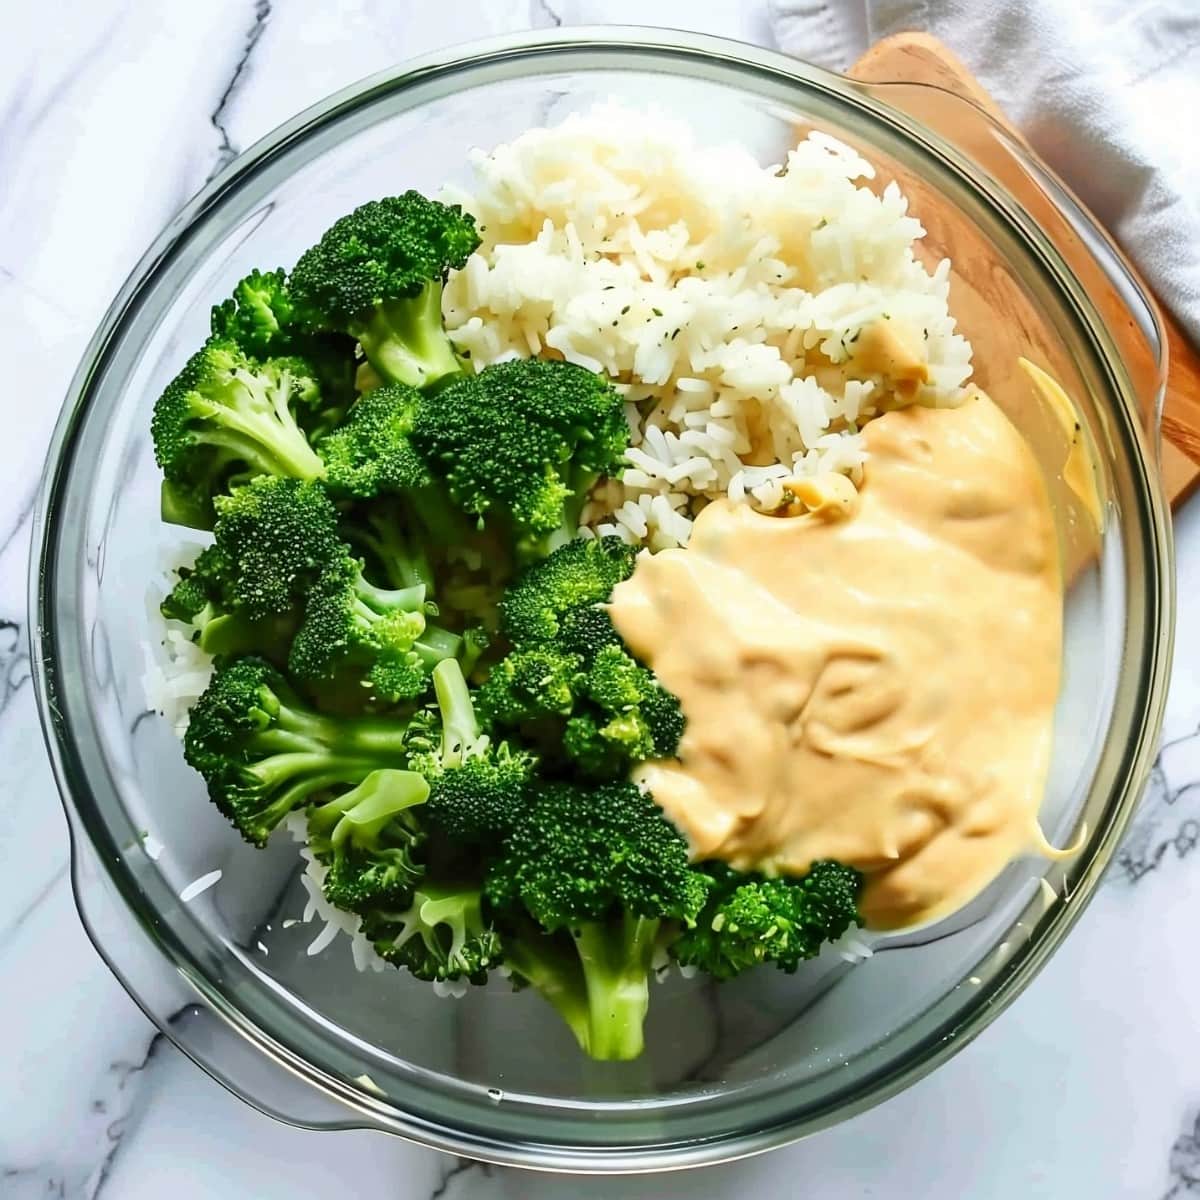 A large glass bowl of fresh broccoli, rice and cheese sauce